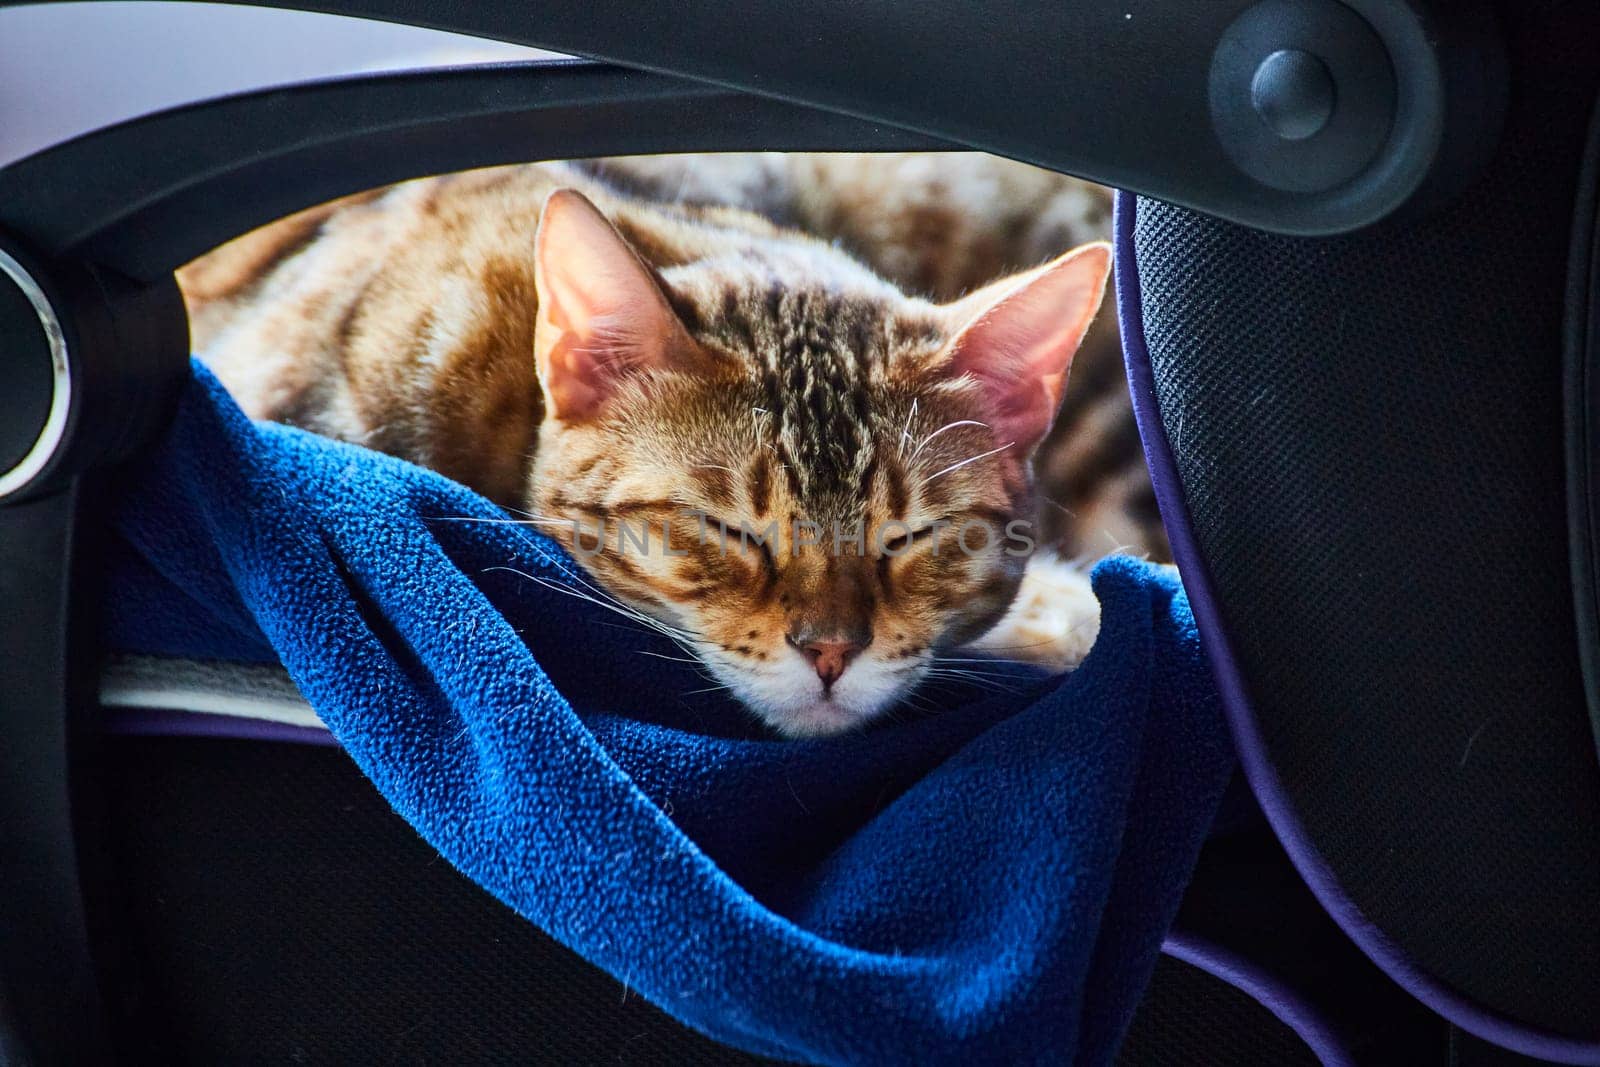 Sleeping Bengal cat on a blue blanket in a modern office chair, symbolizing a pet-friendly, tranquil workspace.